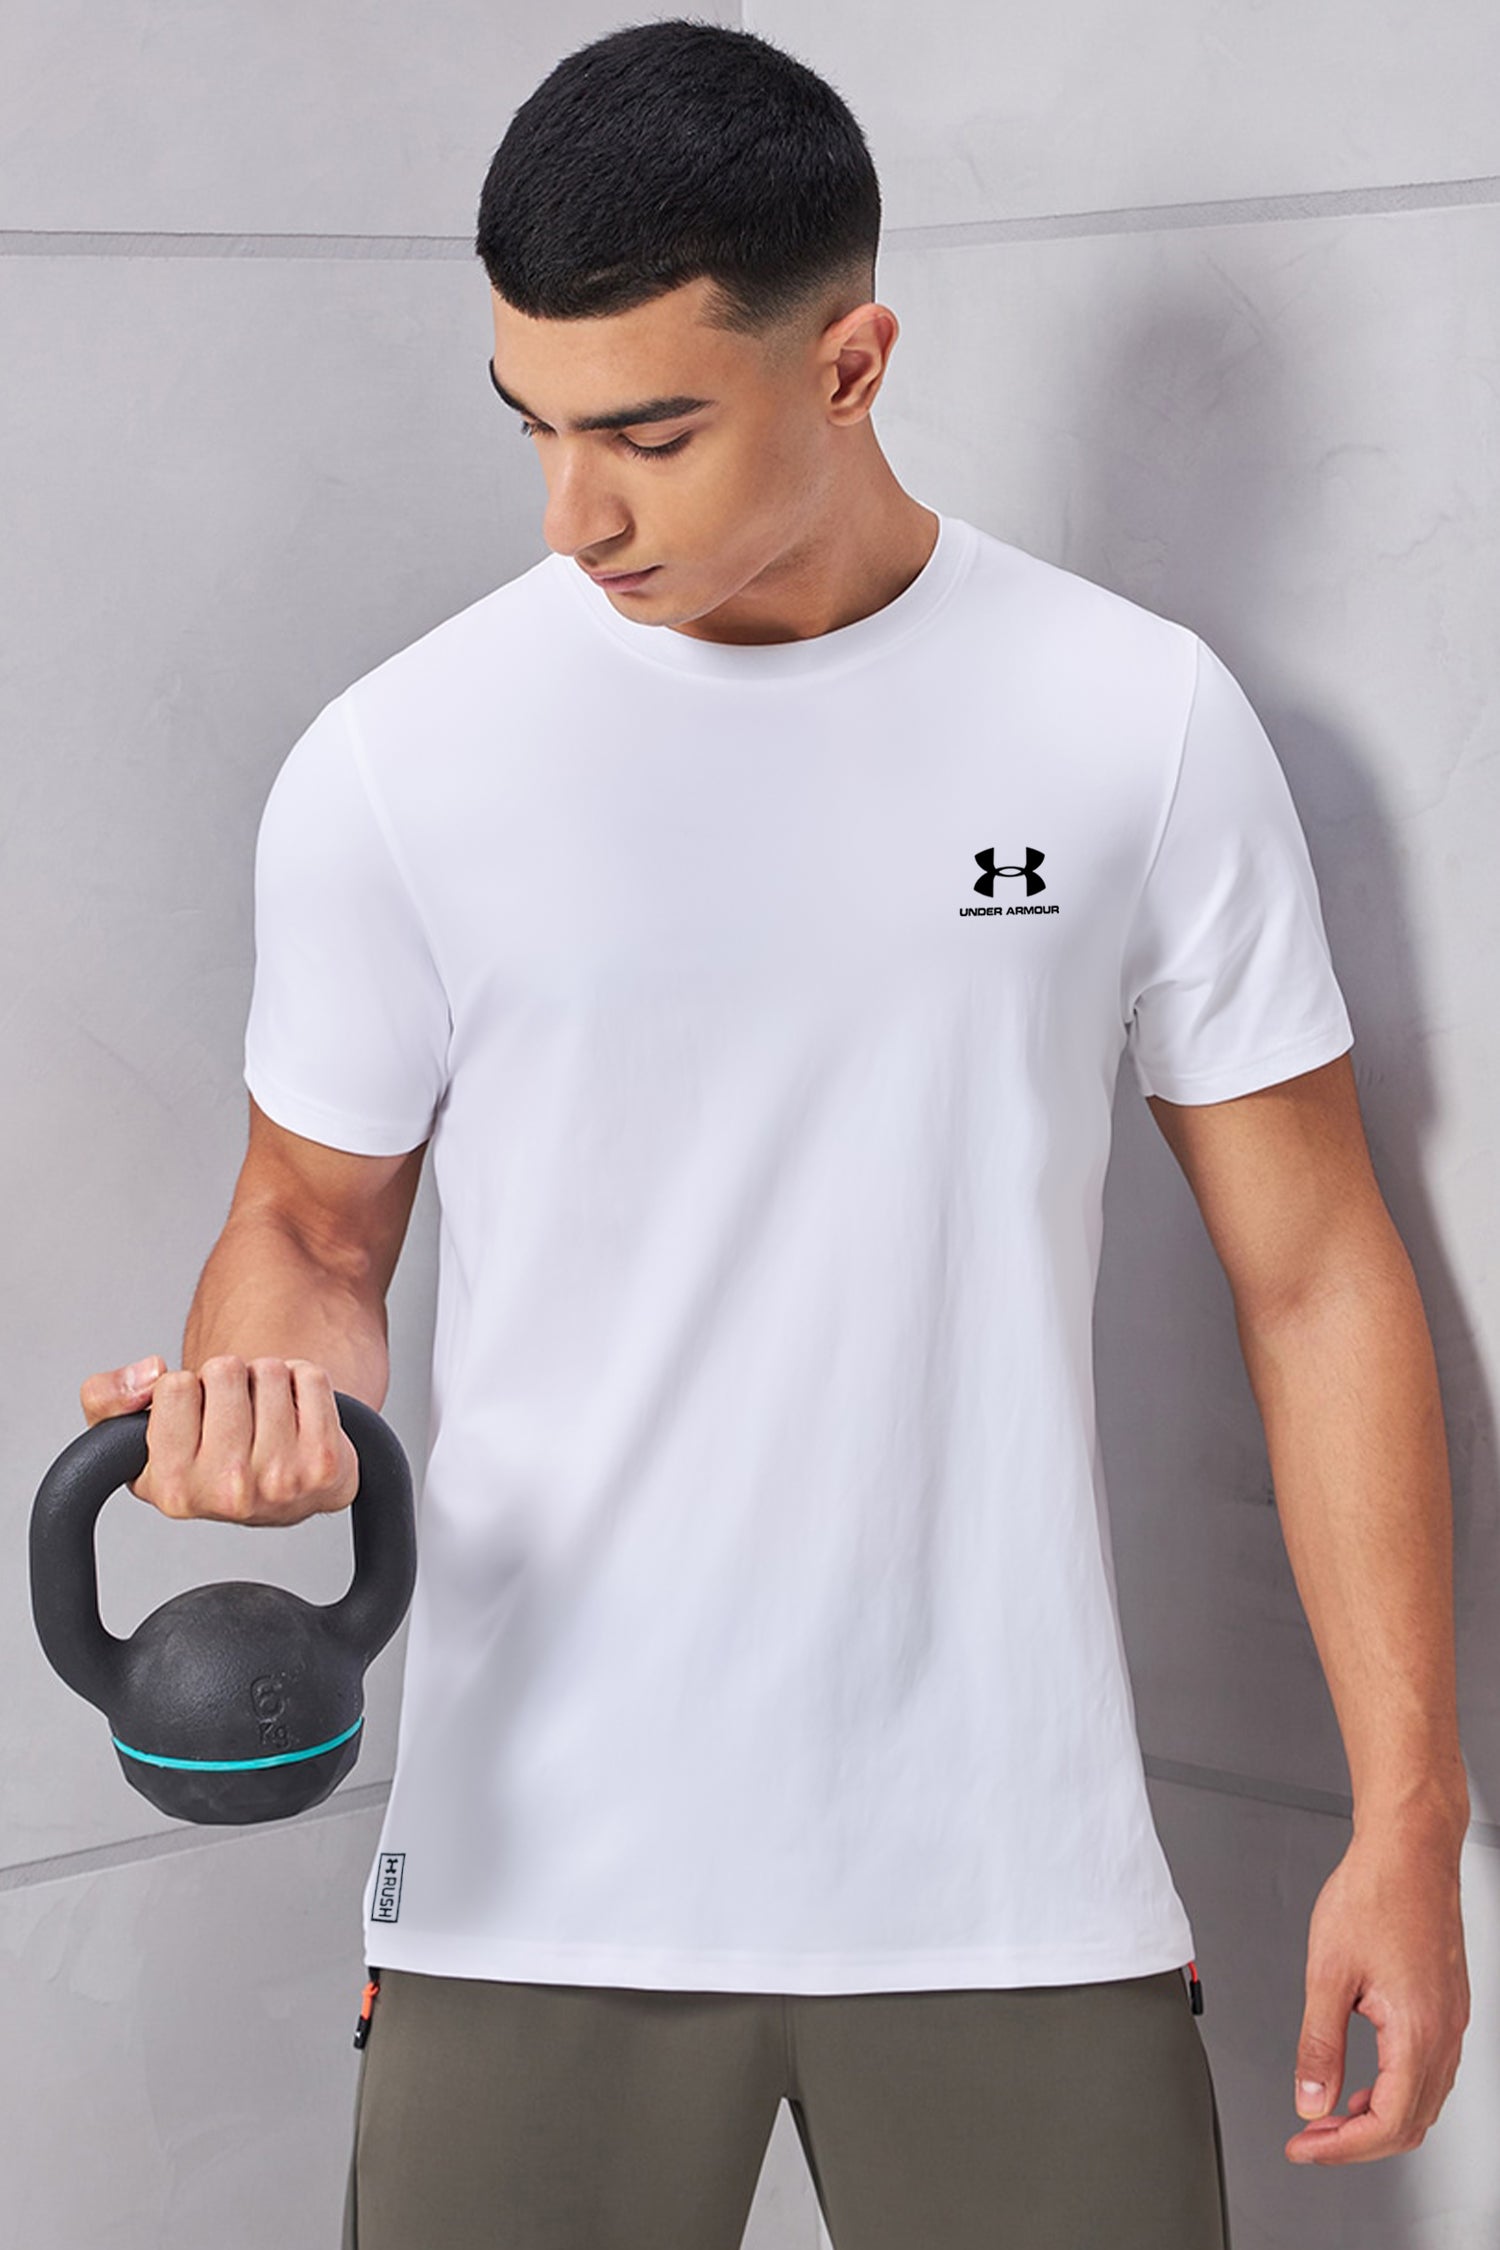 Undr Armur Front Logo Dry Fit Tee